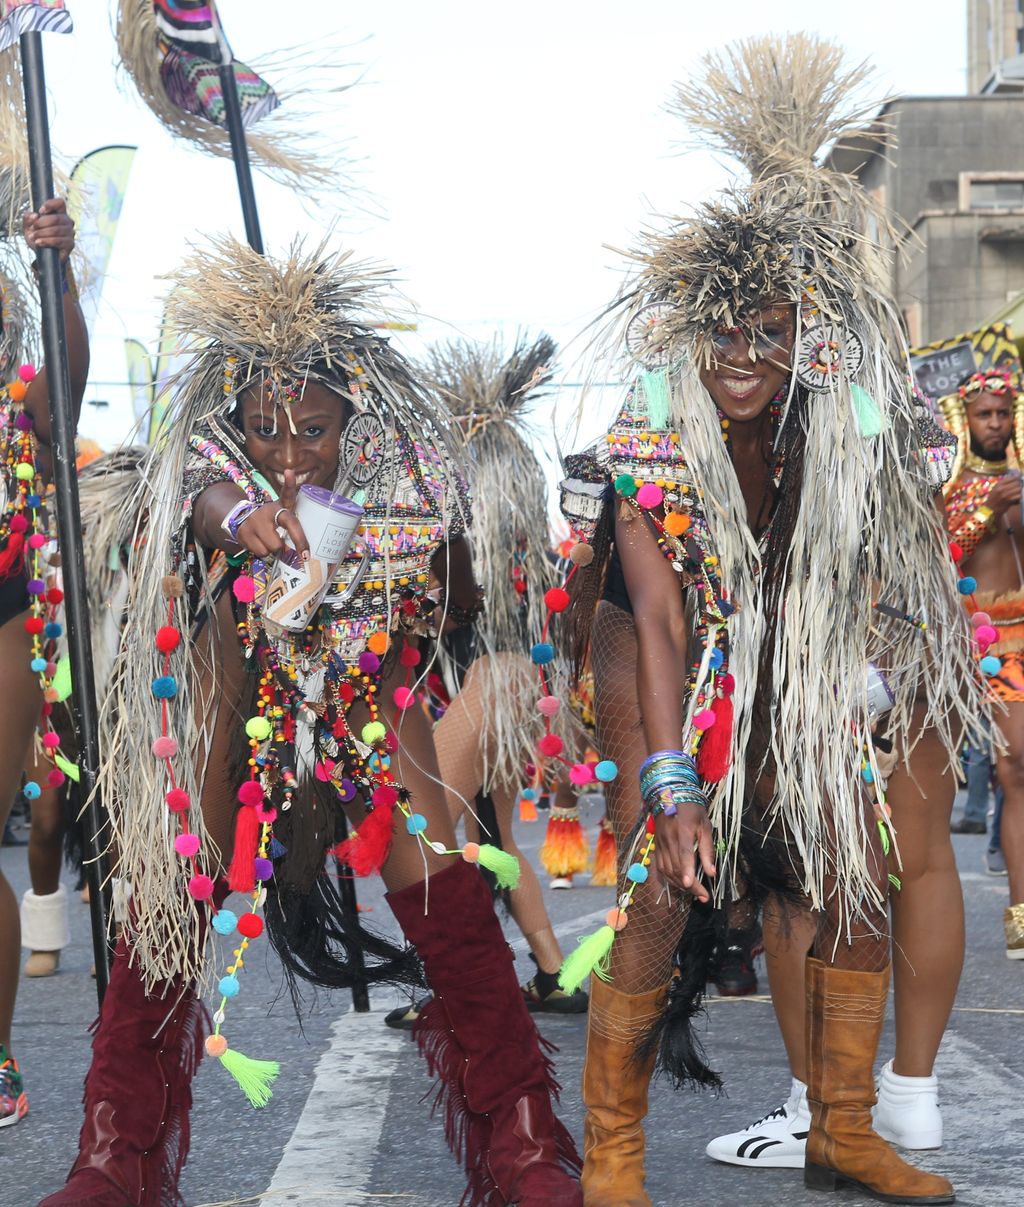 Mitchell told tourism is more than just Carnival Trinidad Guardian